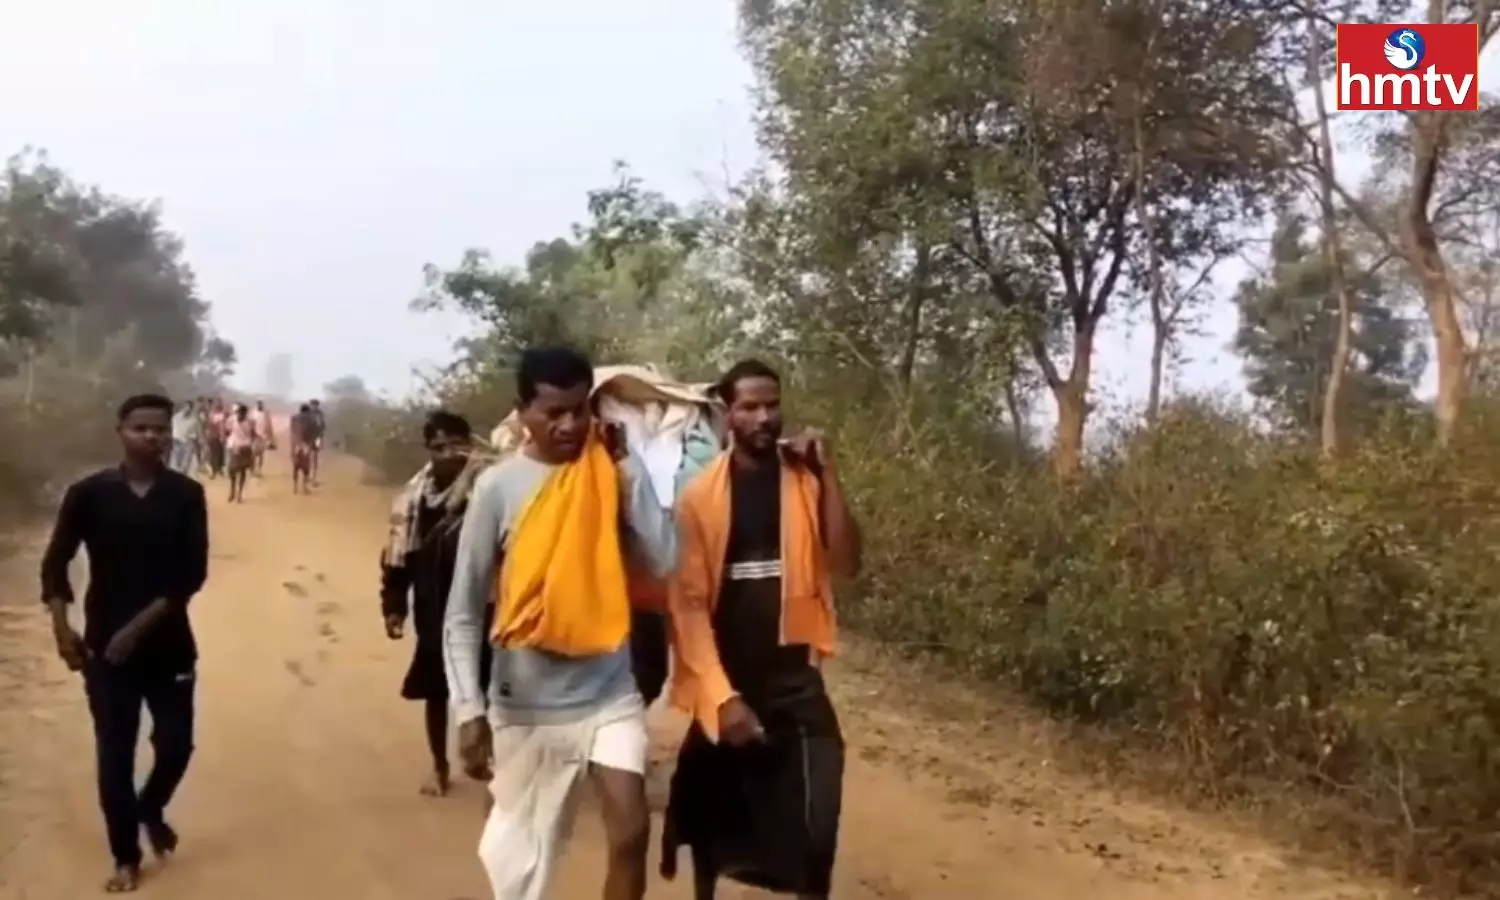 The Husband Carried his Wife DeadBody for 20 Kilometers in Odisha